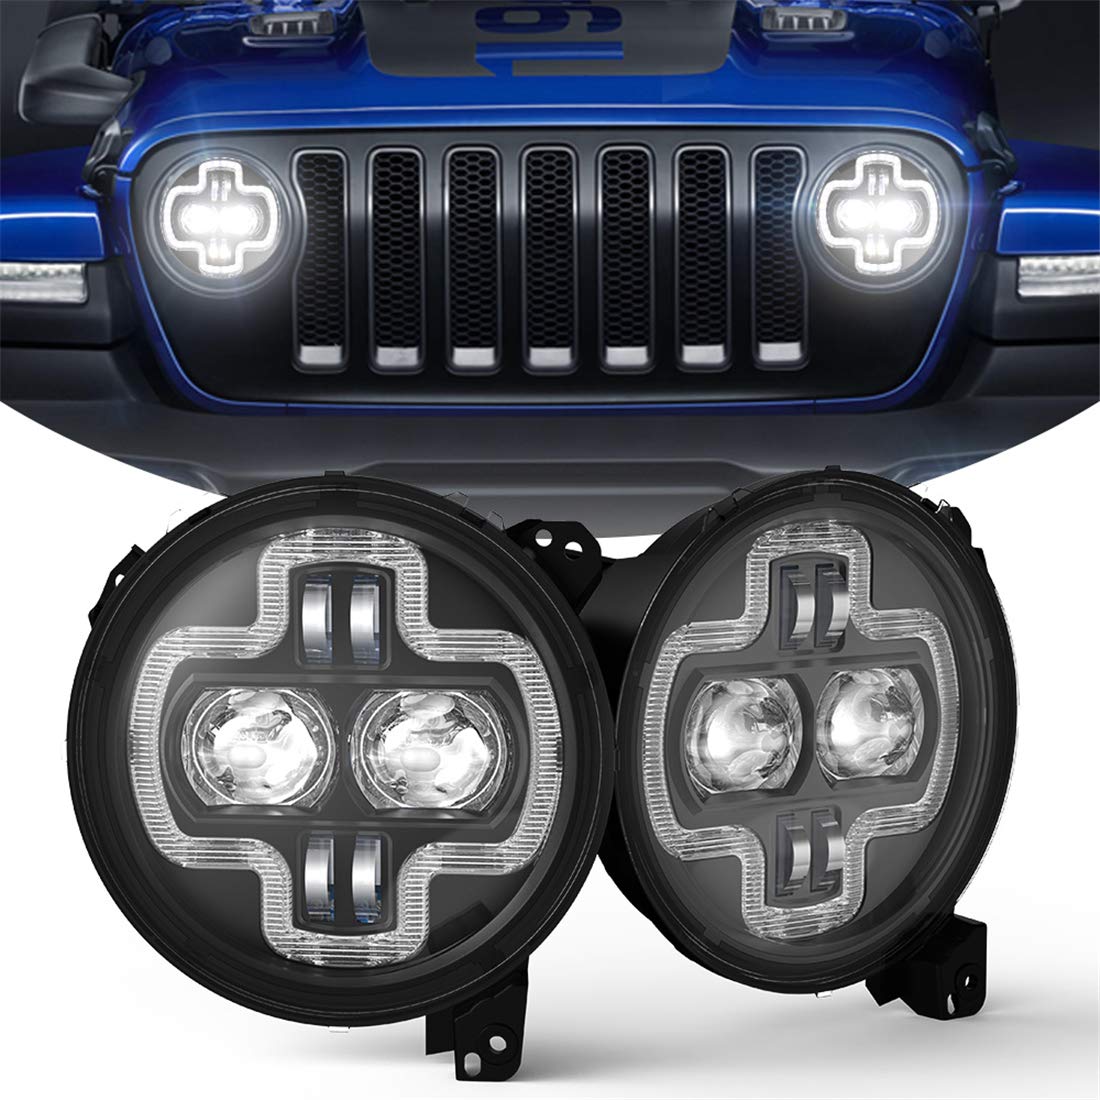 9 Inch Round LED Headlights Halo DRL for 2018 2019 Jeep Wrangler JL 20 –  OffGrid Store